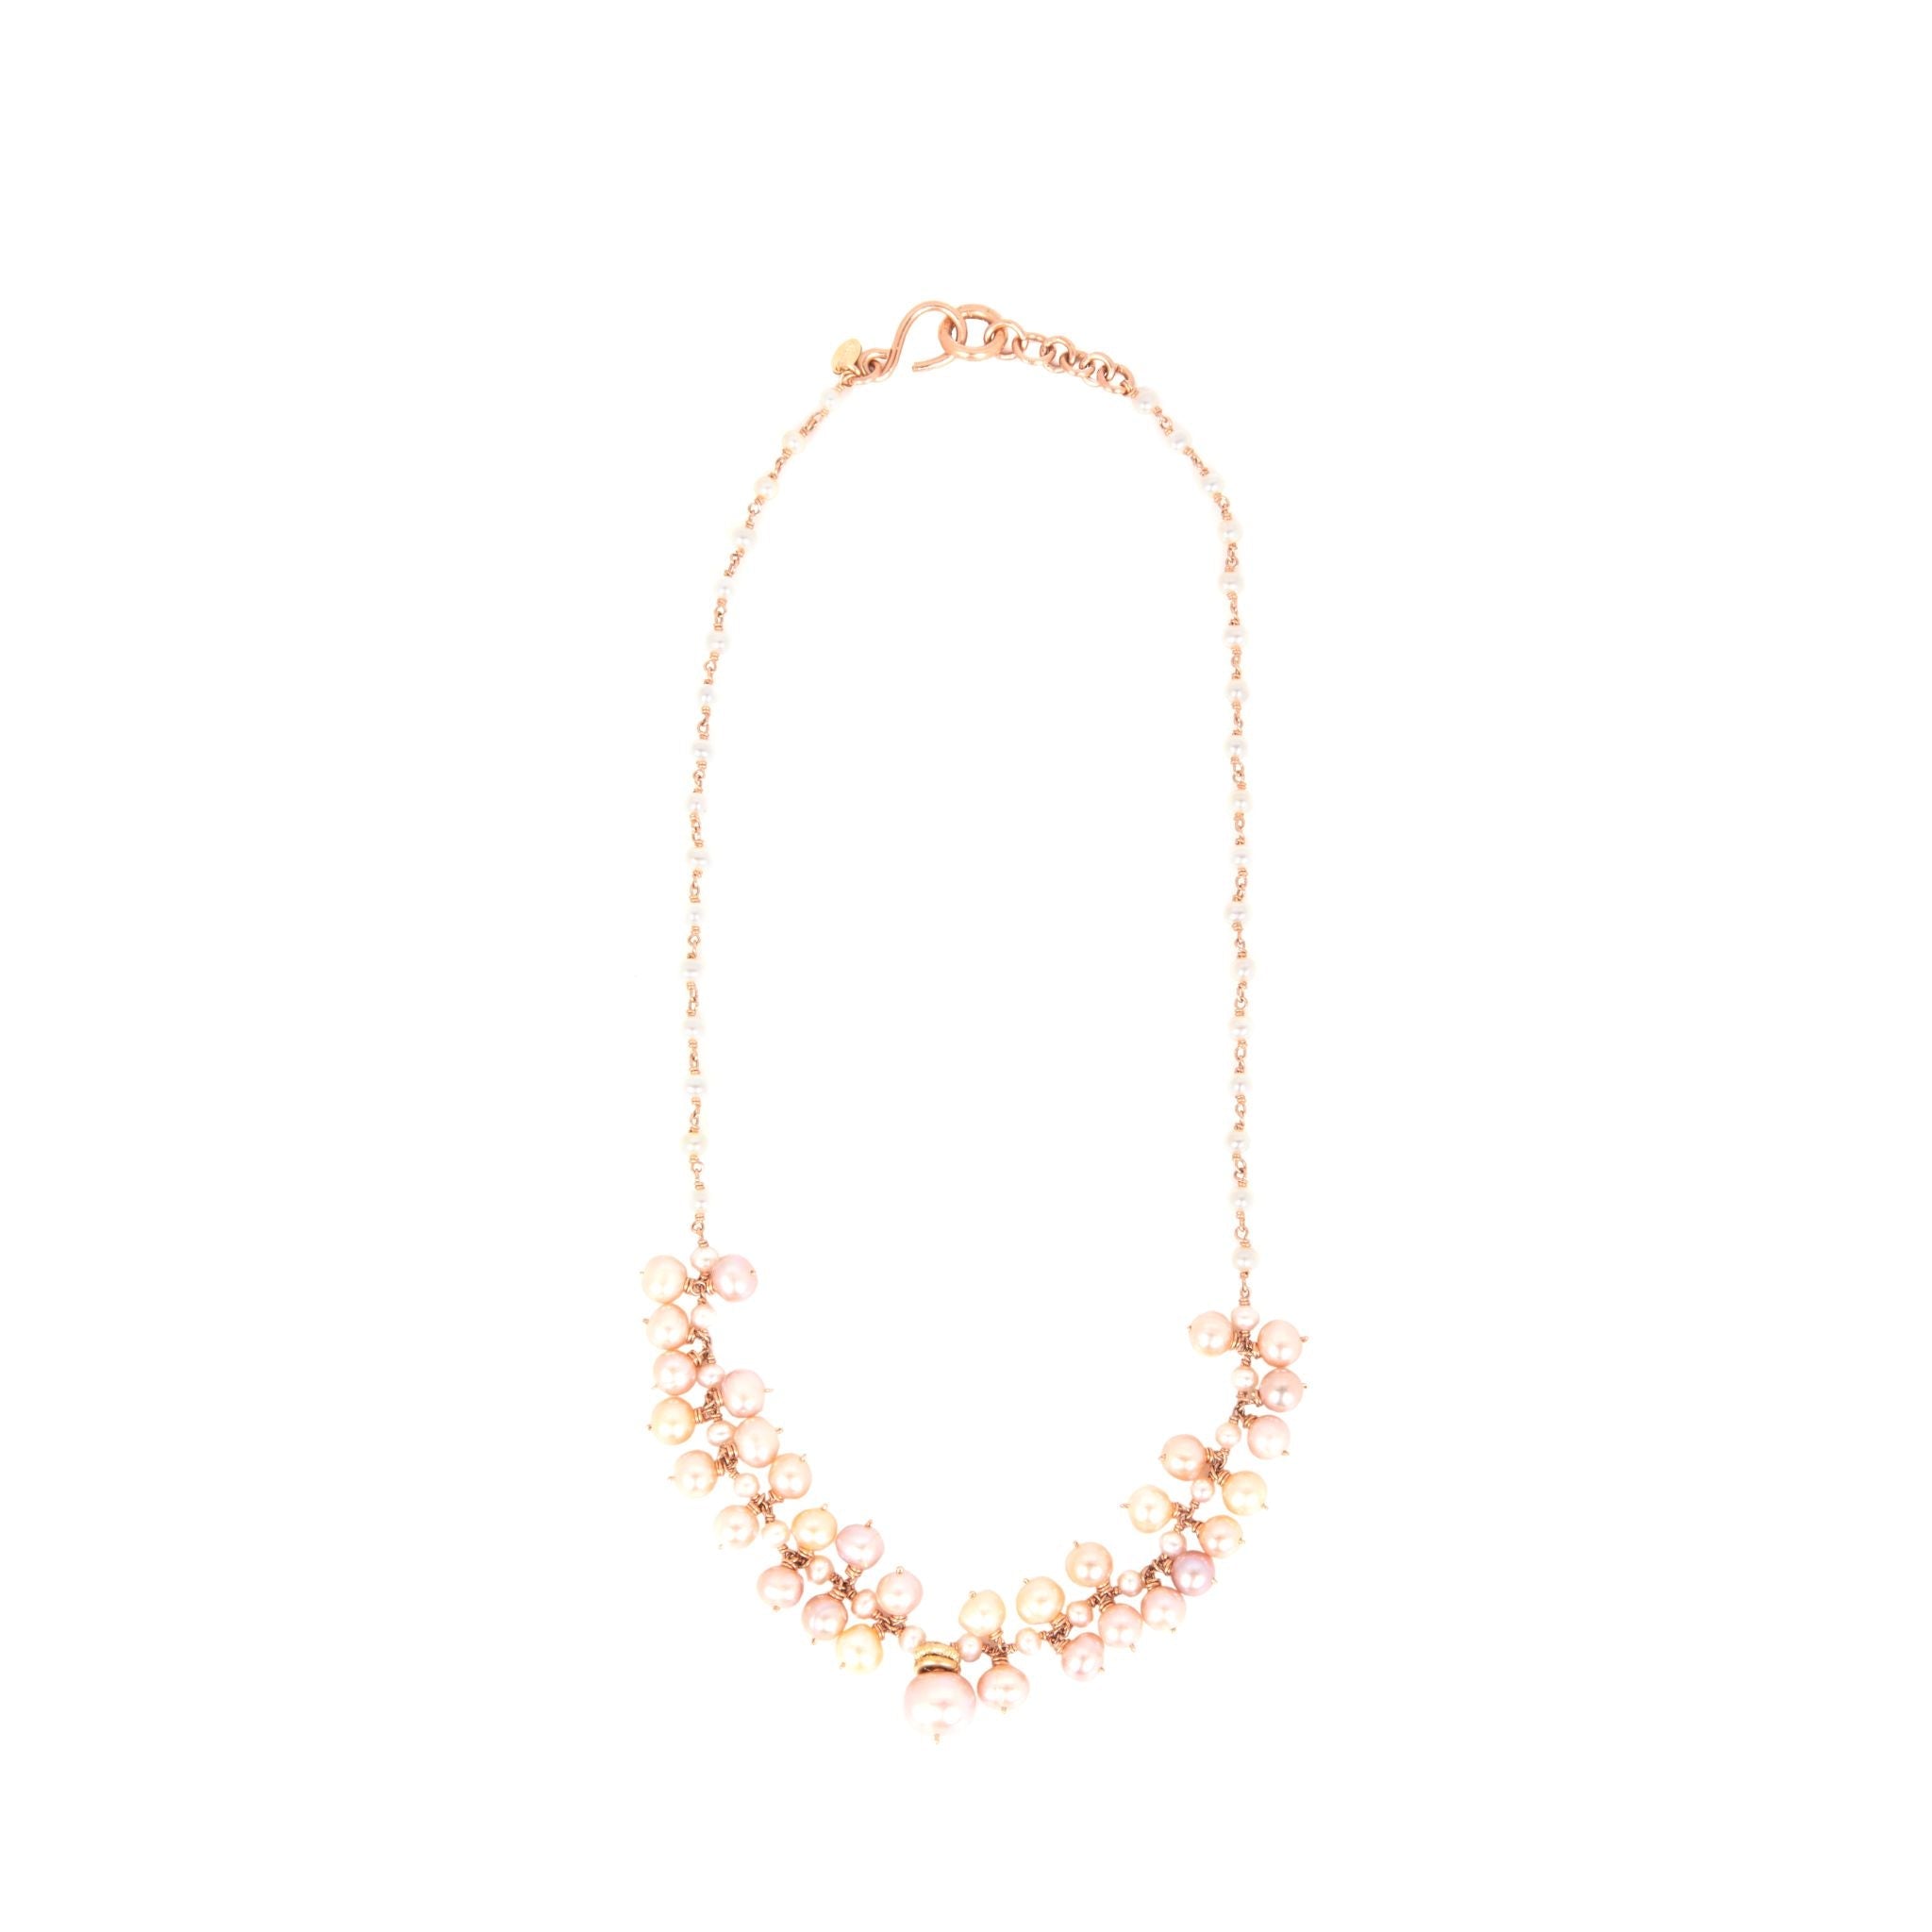 Margarita Pearls Necklace #18 Salmon Pearl Necklaces TARBAY   